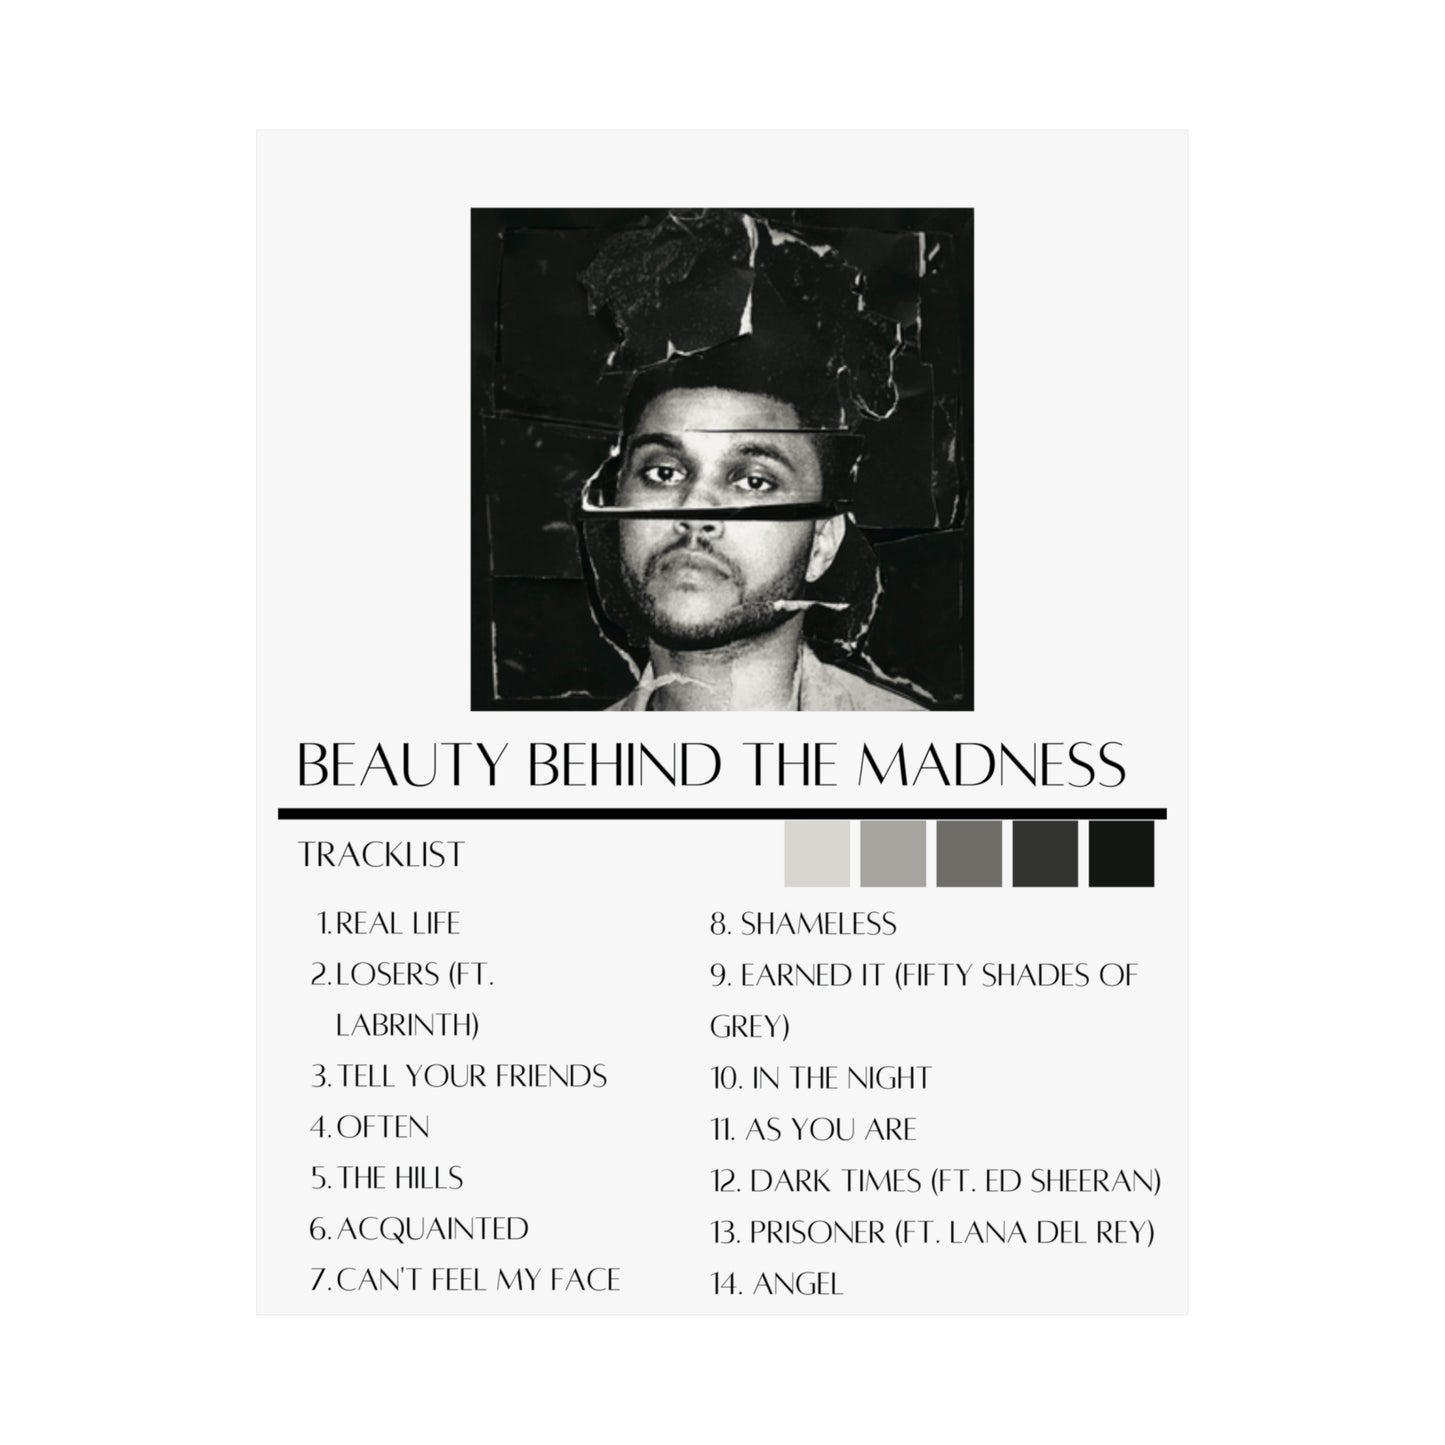 The Weeknd: Beauty Behind the Madness(Matte Poster)